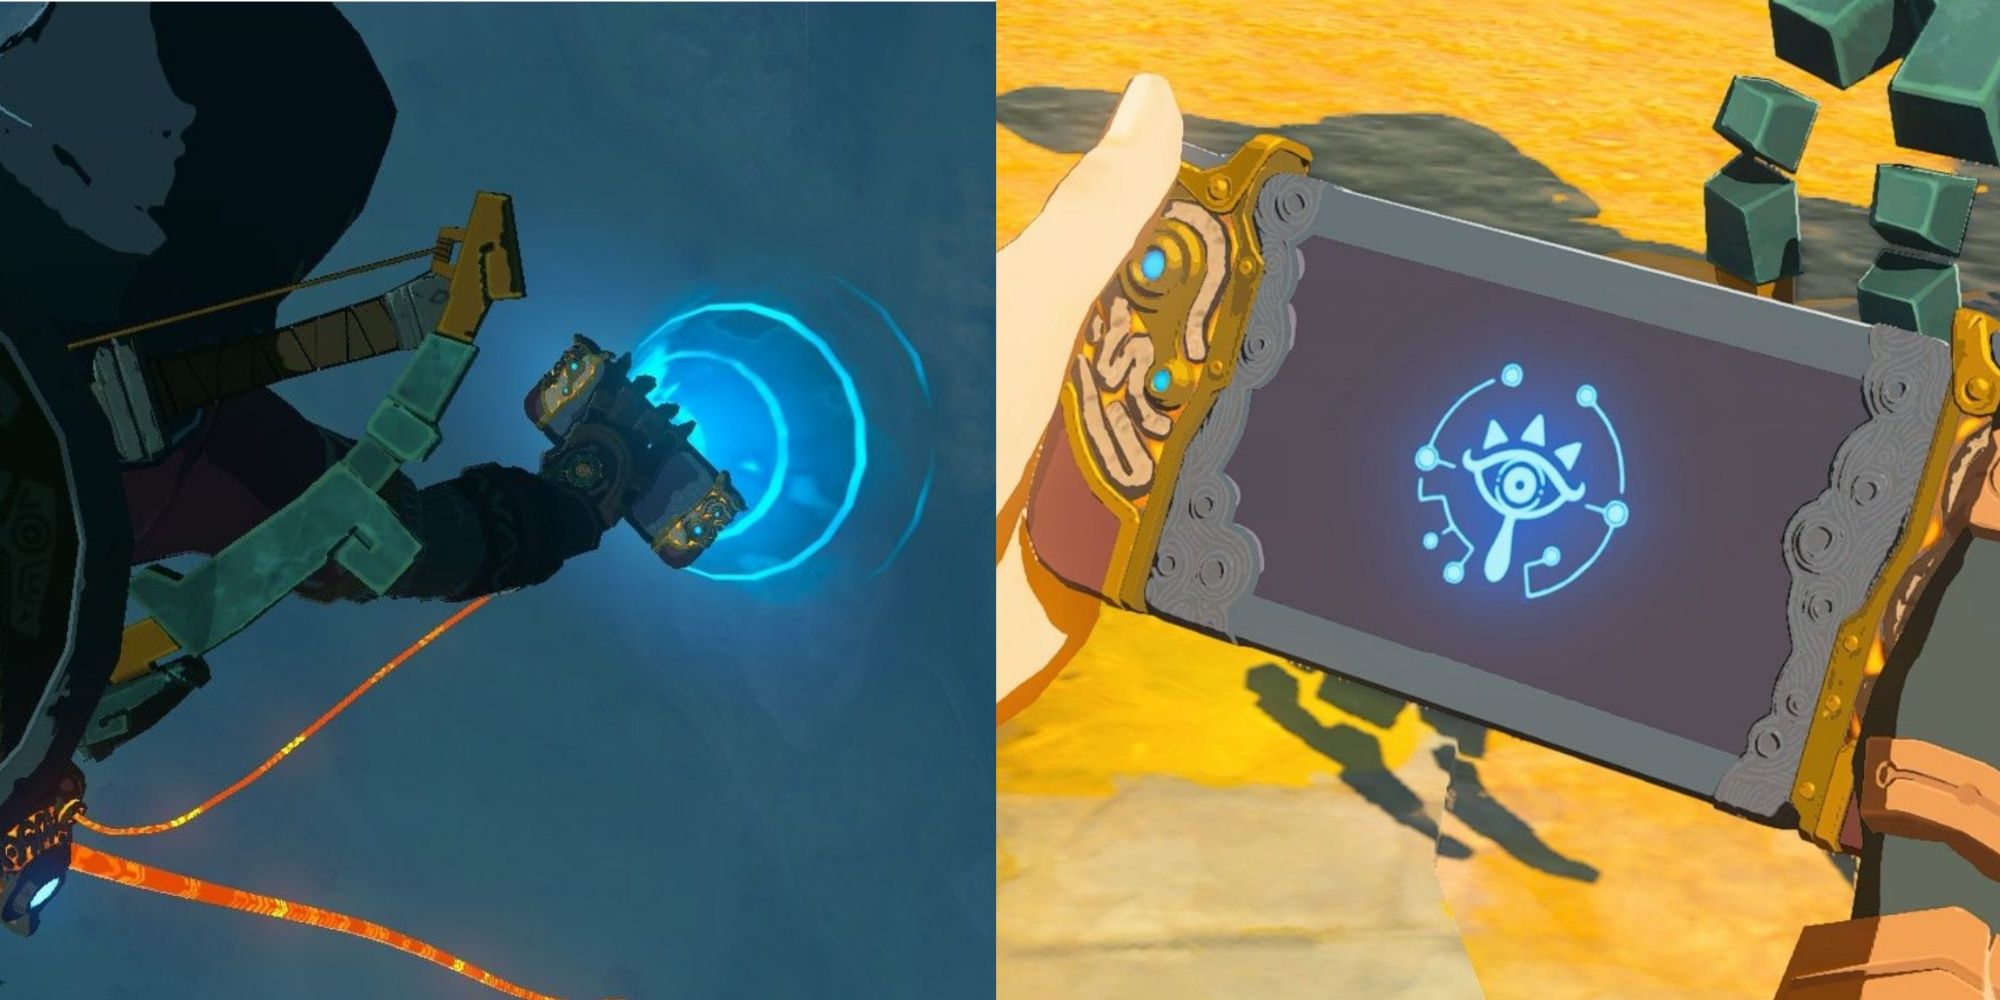 Collage image of Link using the purah pad and a close up on the device, in The Legend Of Zelda: Tears Of The Kingdom.